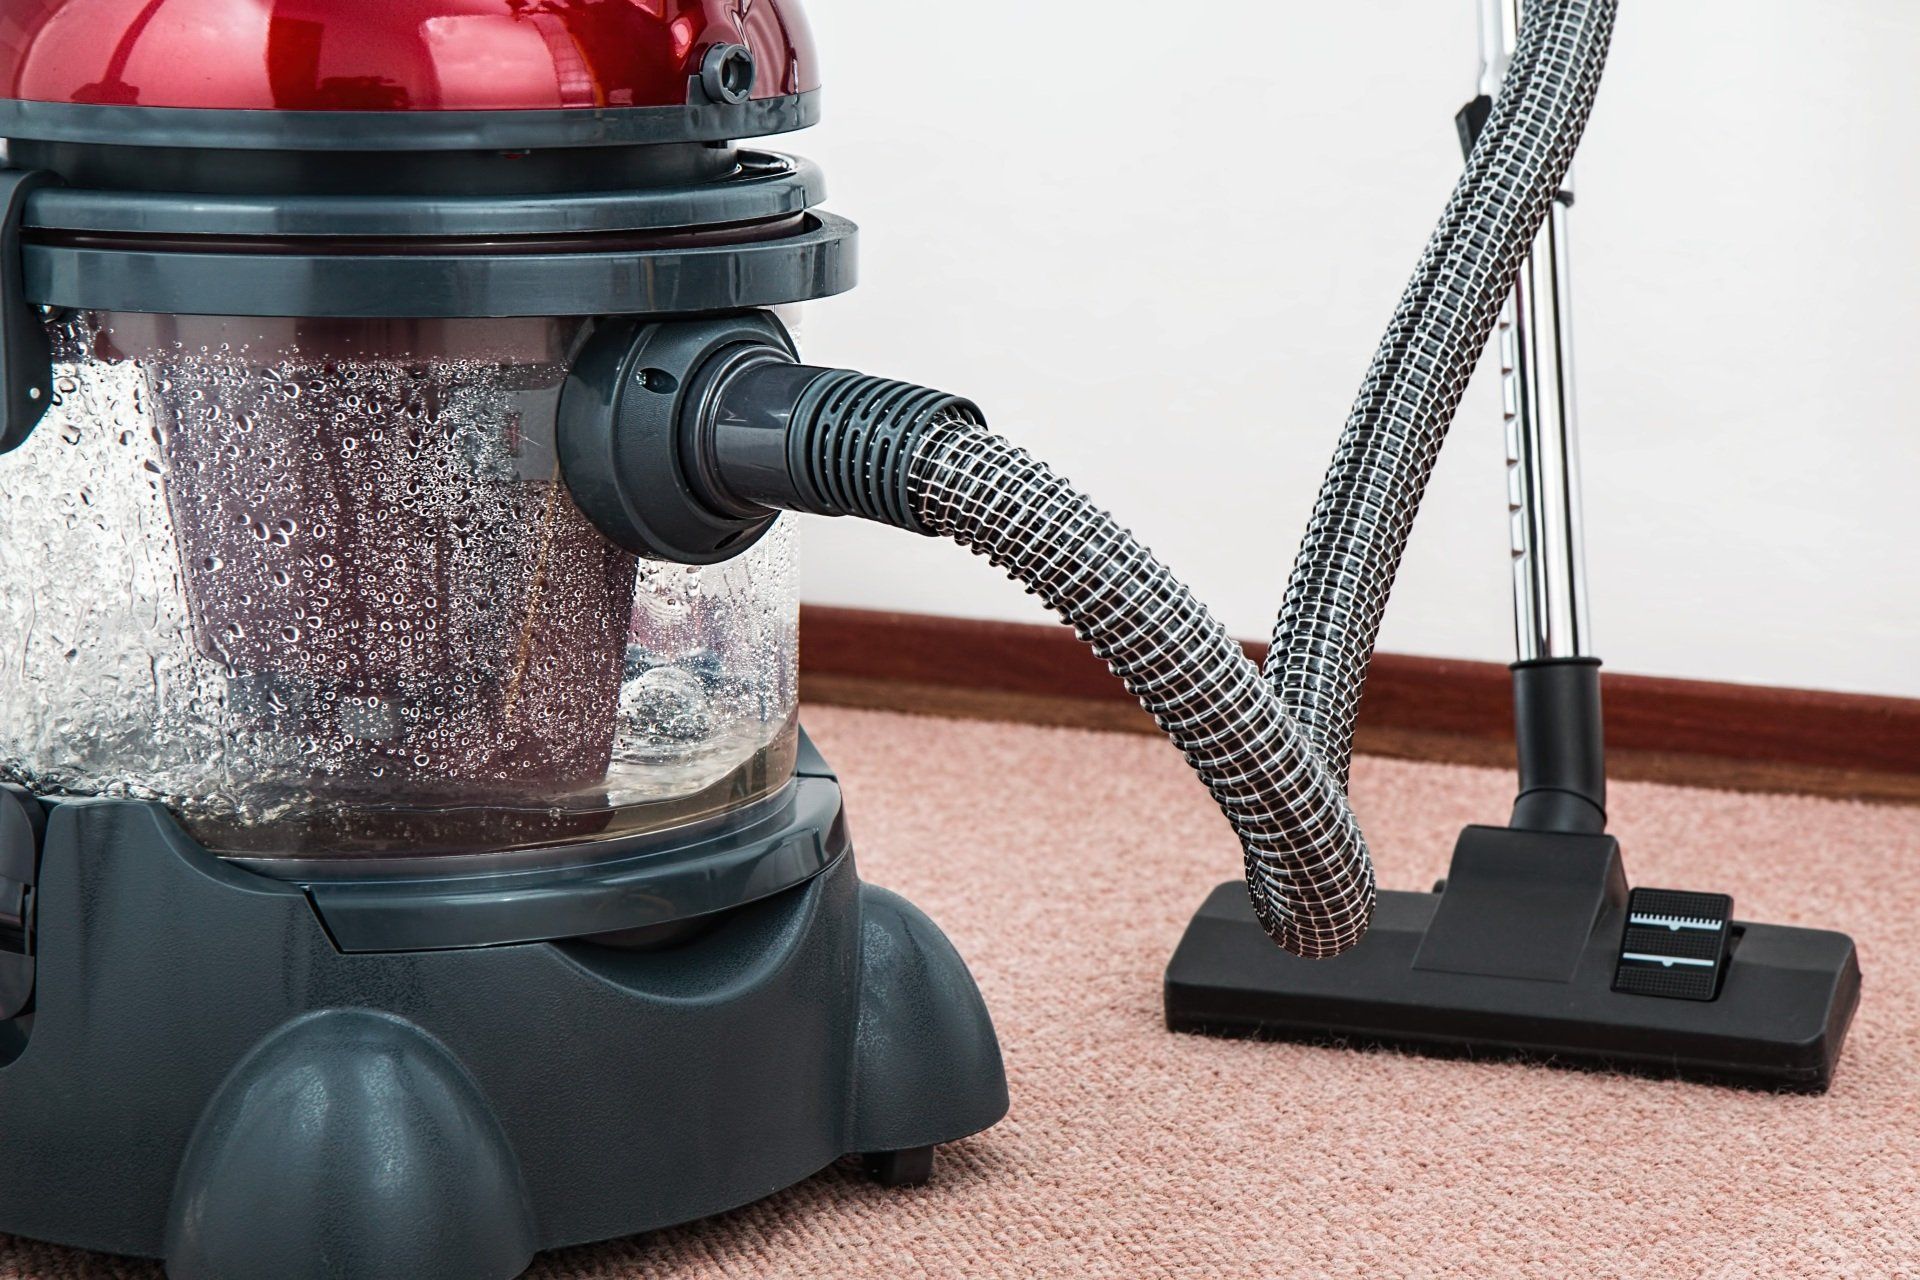 Professional carpet cleaning service using advanced equipment to restore carpets' vibrancy and cleanliness in a commercial setting.